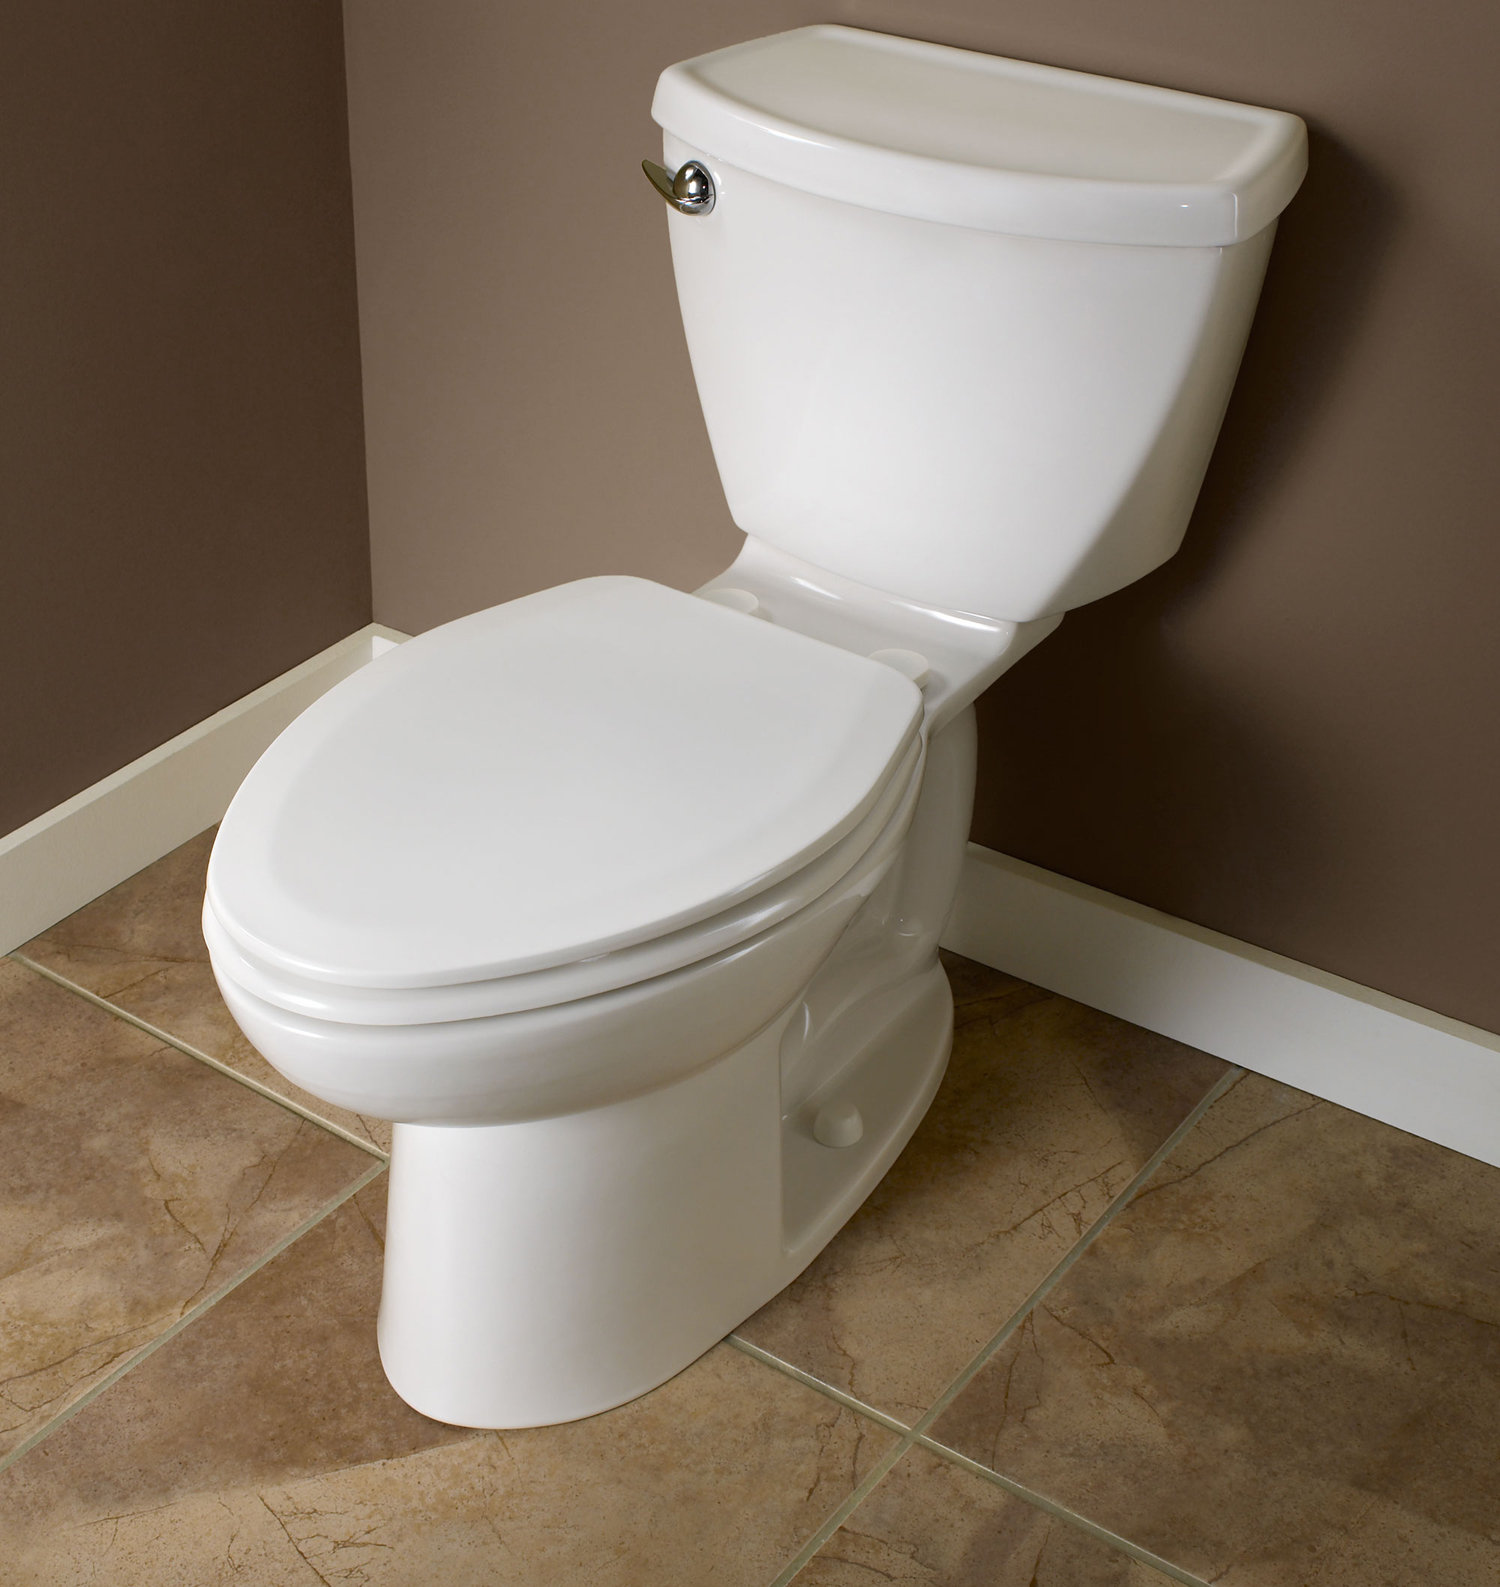 elongated commode lid covers